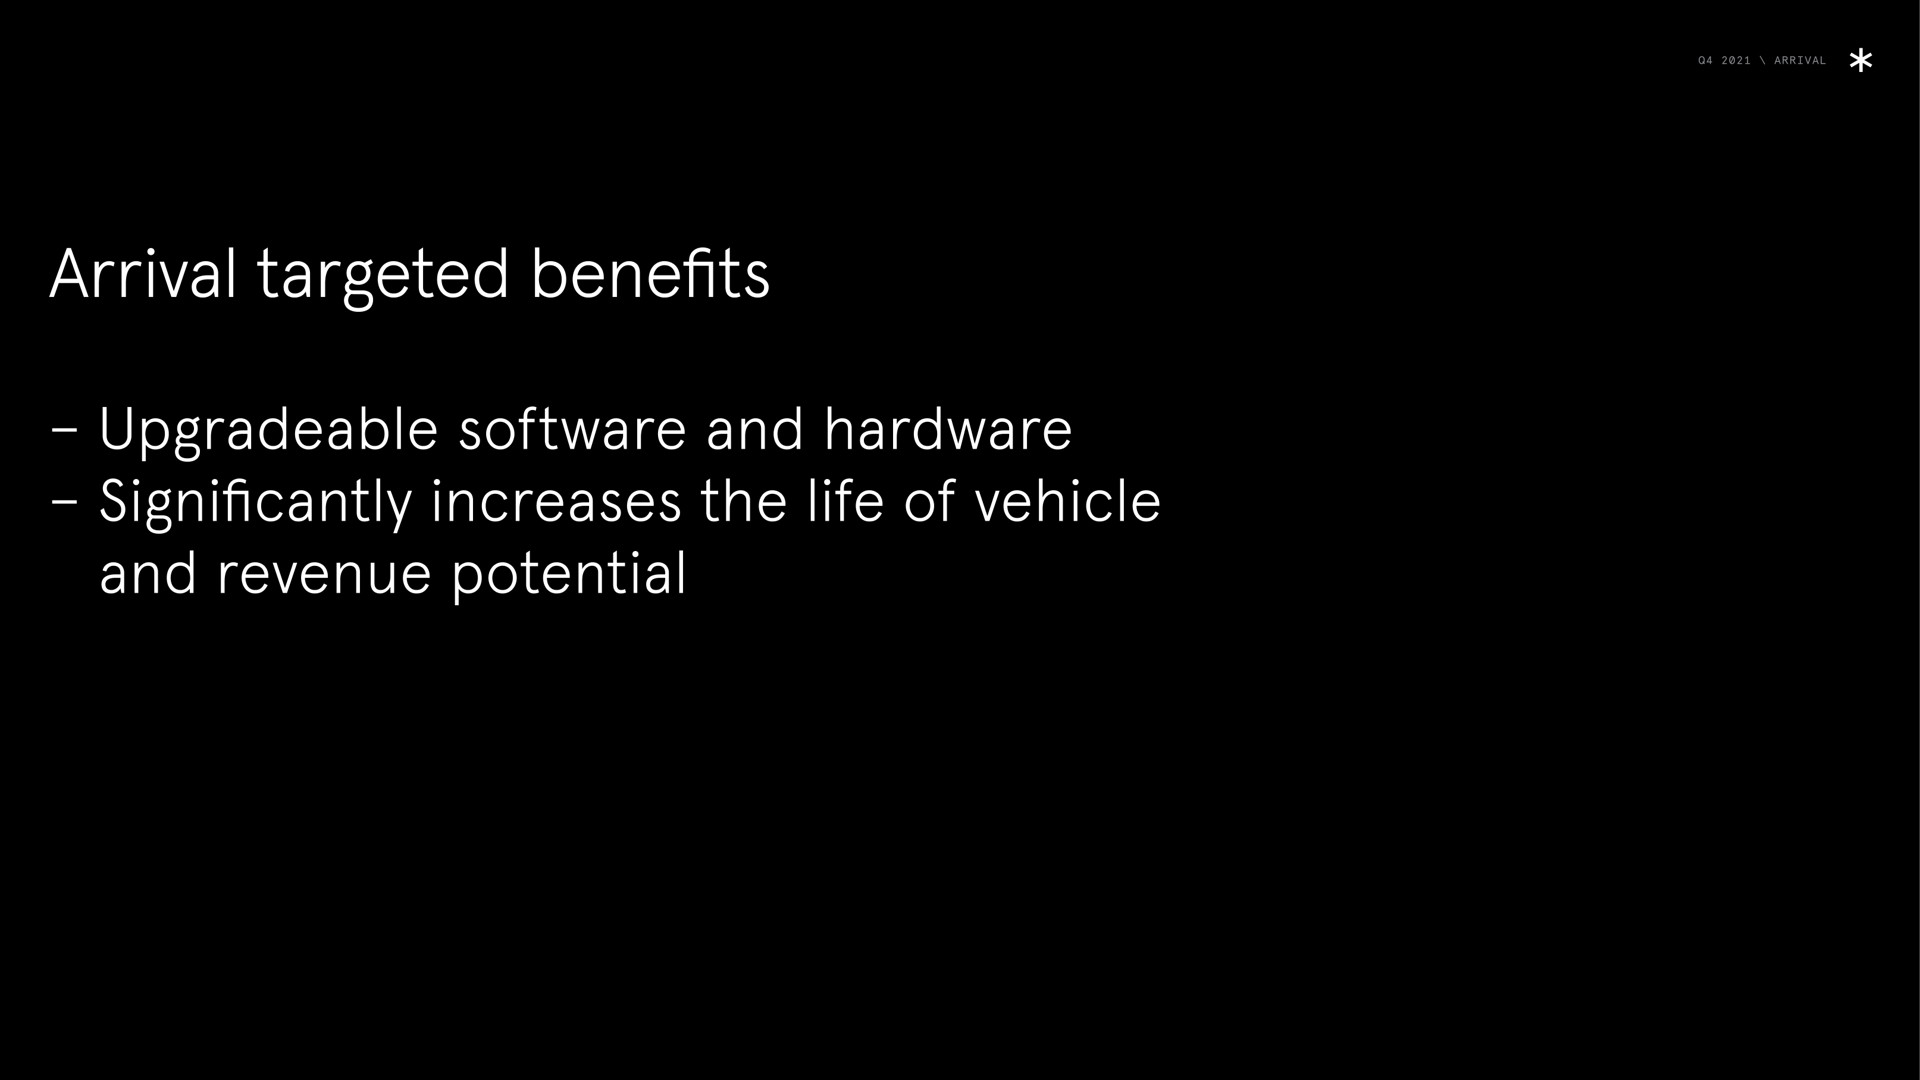 arrival arrival targeted benefits and hardware significantly increases the life of vehicle and revenue potential | Arrival